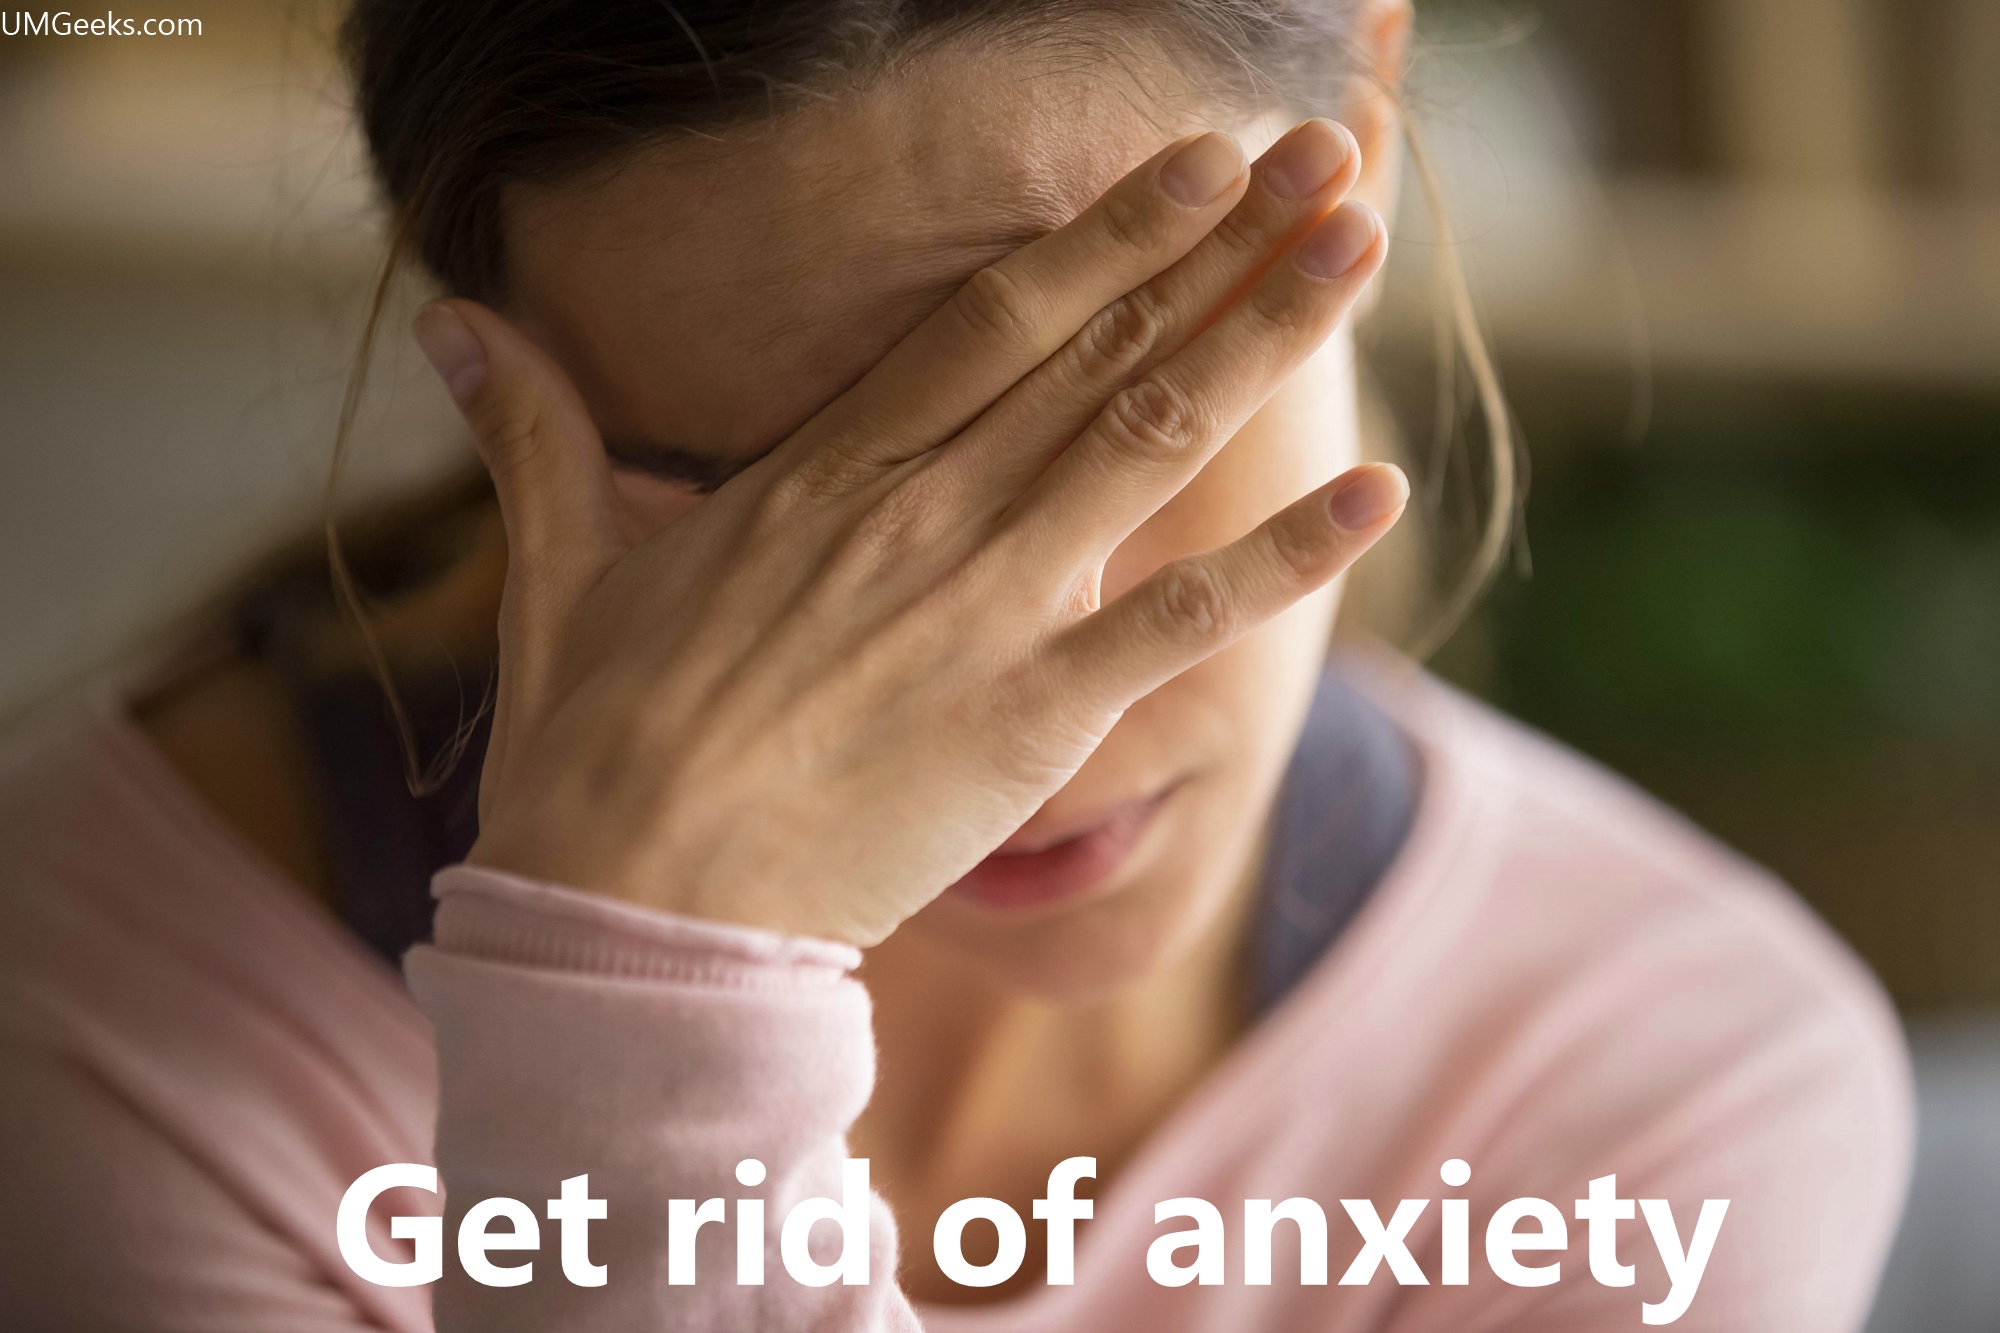 Simple ways to calm down and get rid of anxiety